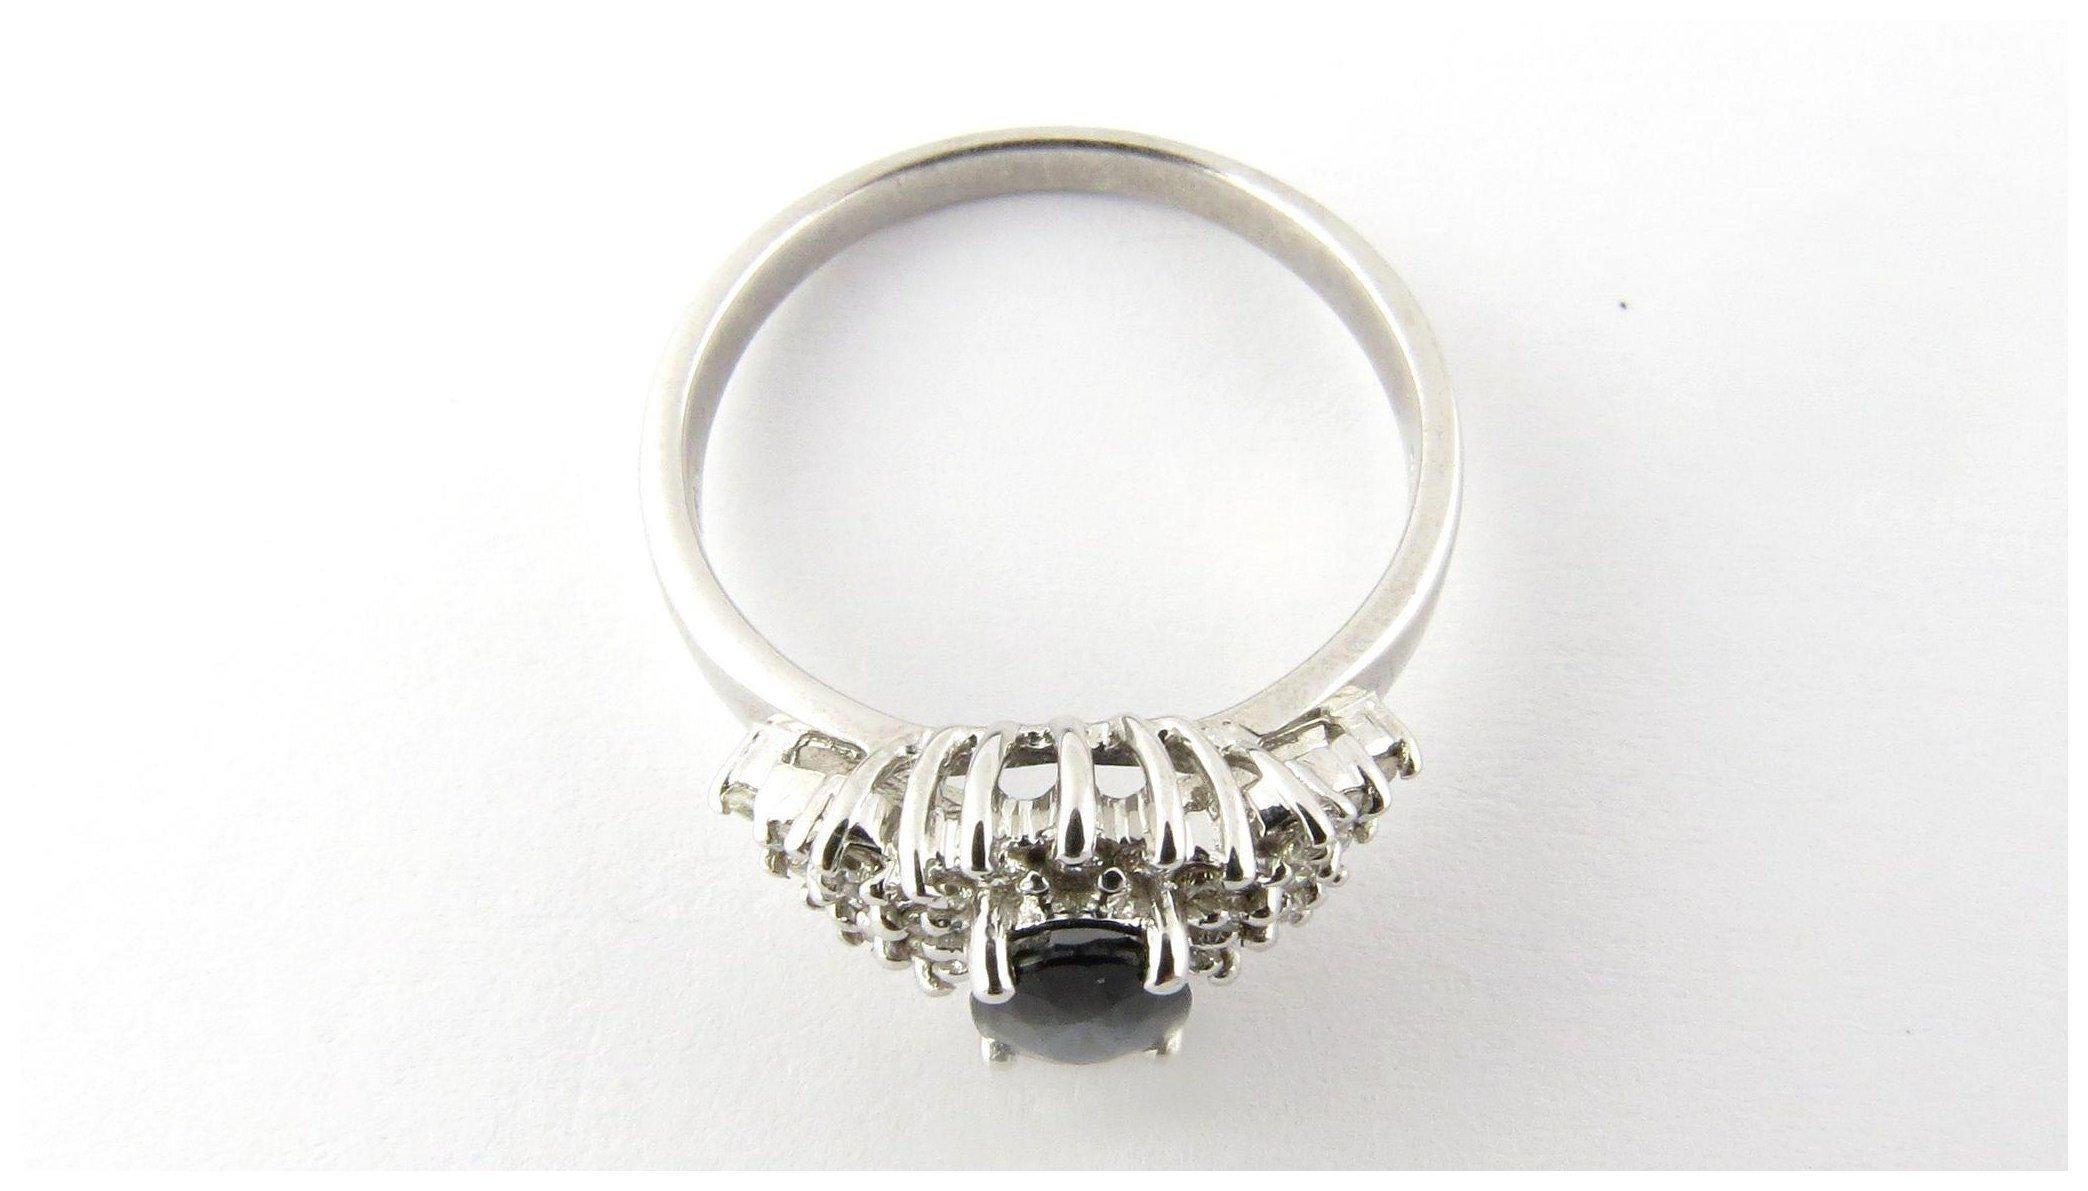 Vintage 14 Karat White Gold Genuine Sapphire and Diamond Ring Size 8.5- 
This lovely ring features one genuine oval sapphire (7 mm x 5 mm) surrounded by 26 round brilliant cut diamonds. Shank measures 2 mm. Top of ring measures 11 mm x 17 mm.